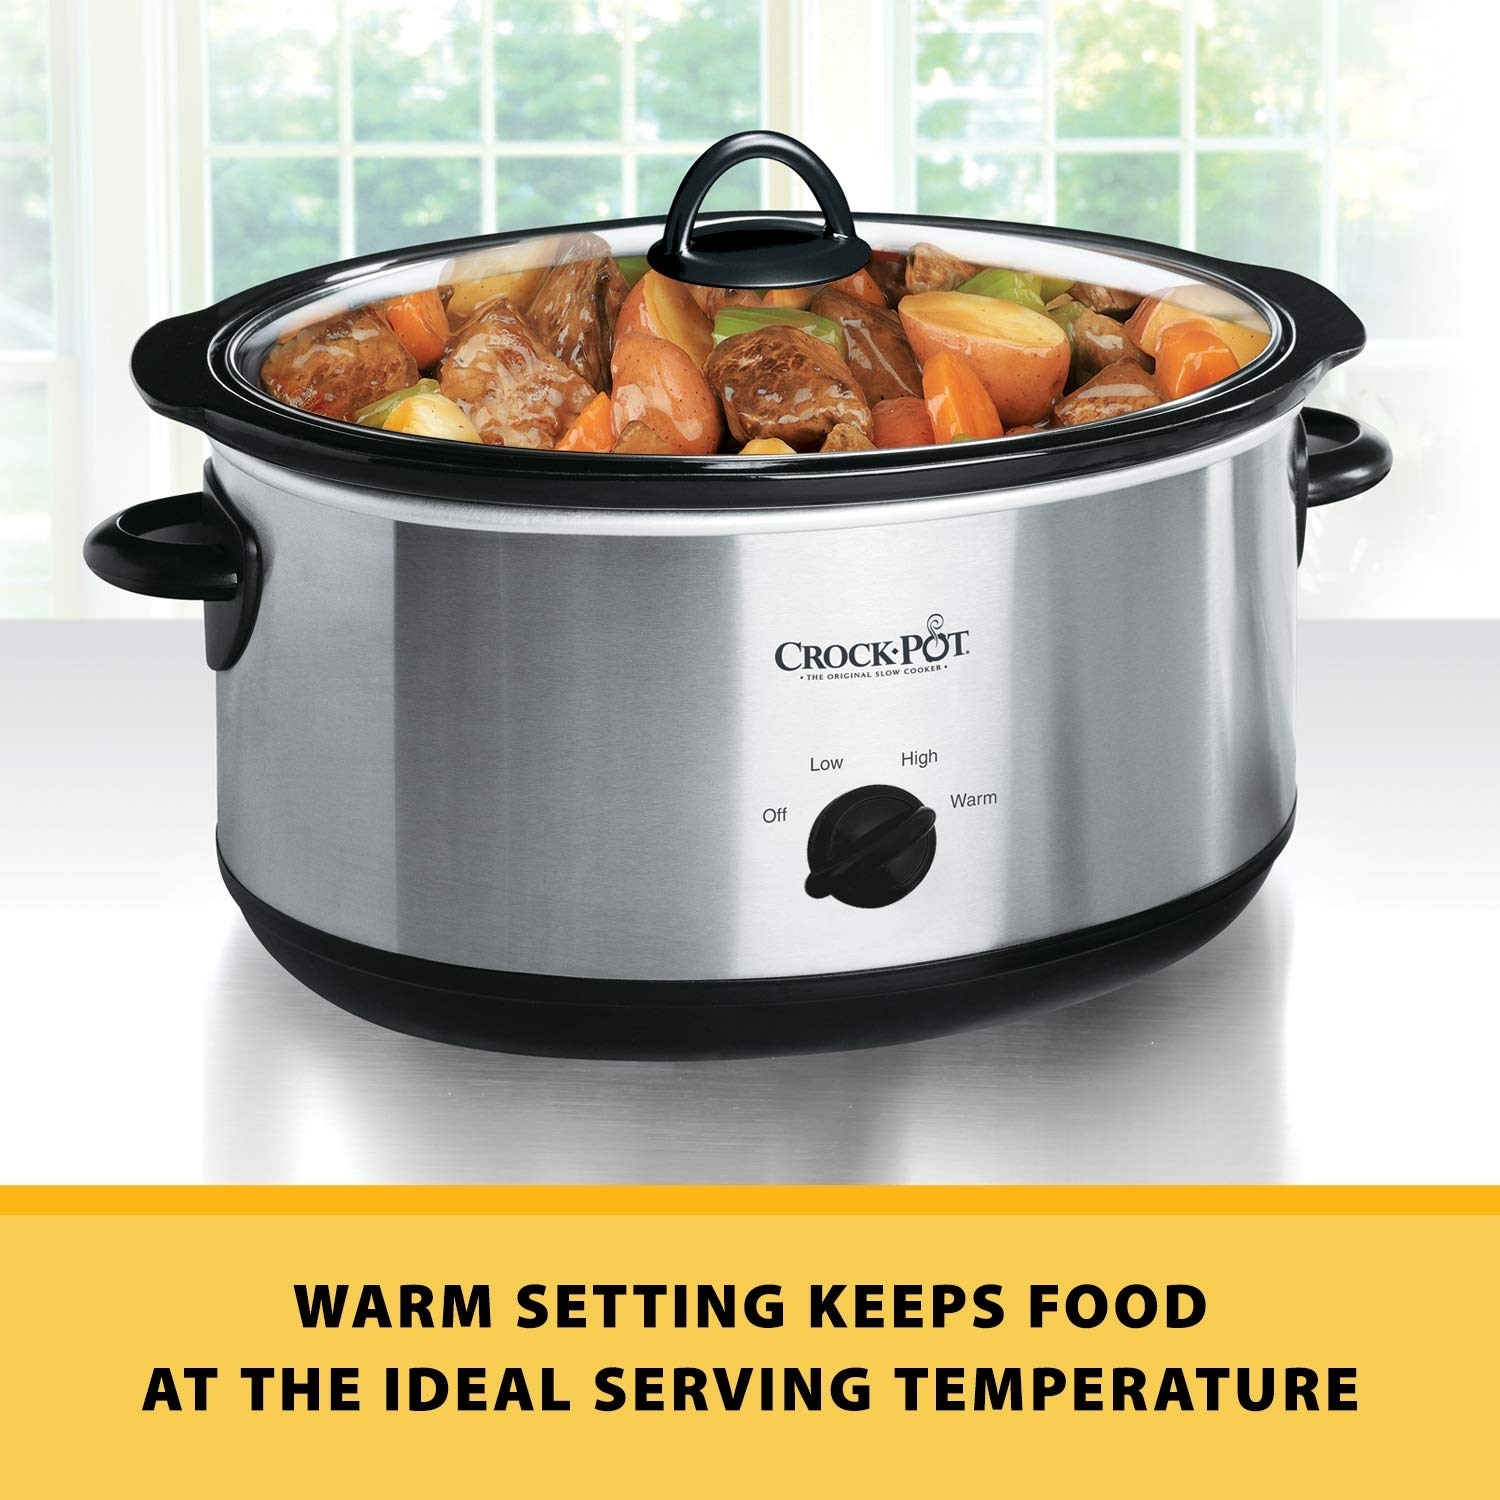 https://ak1.ostkcdn.com/images/products/is/images/direct/4eb45b24214a4925daa15bdf50b4988d3c061339/Large-8-Quart-Slow-Cooker-with-Small-Mini-16-Ounce-Portable-Food-Warmer%2C-Kitchen-Appliance-Bundles%2C-Stainless-Steel.jpg